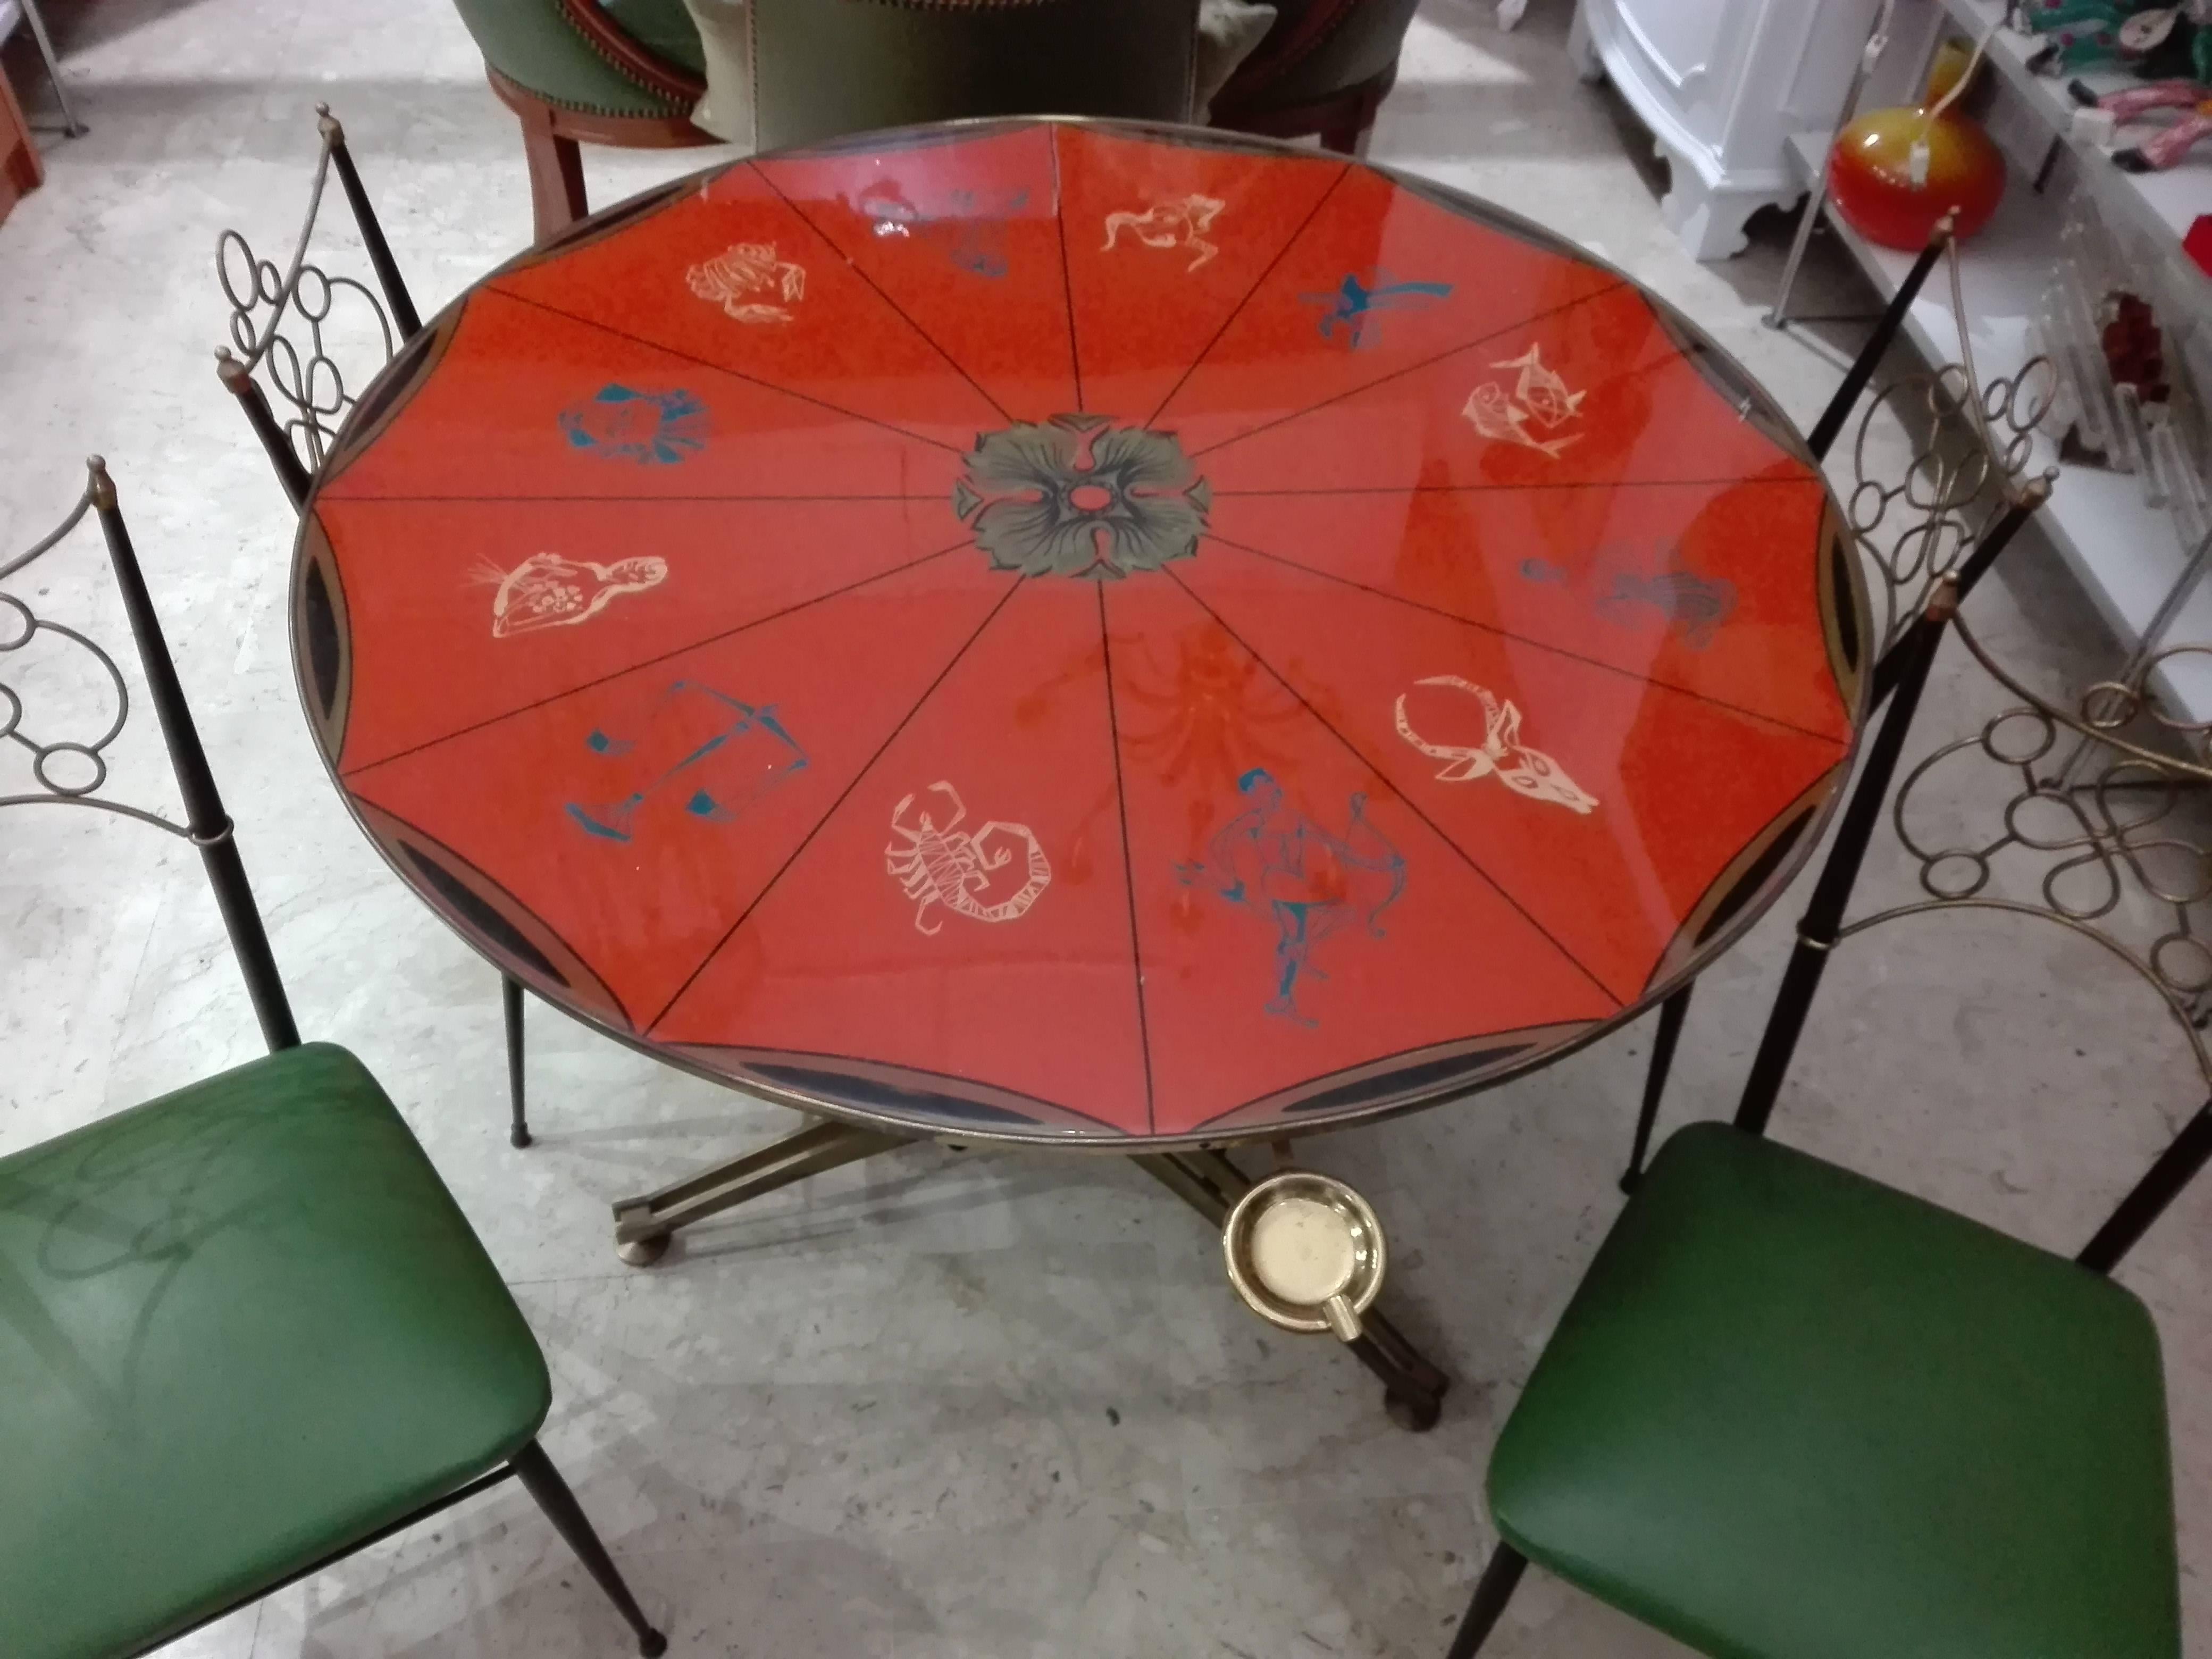 Exceptional round coffee table/game 50 years plan with zodiac signs
Brass feet adjustable in height
Measures: diameter of the top 100 cm, height 79 cm
Set of four chairs from the 1950s.
Handicraft production - structure in painted metal and